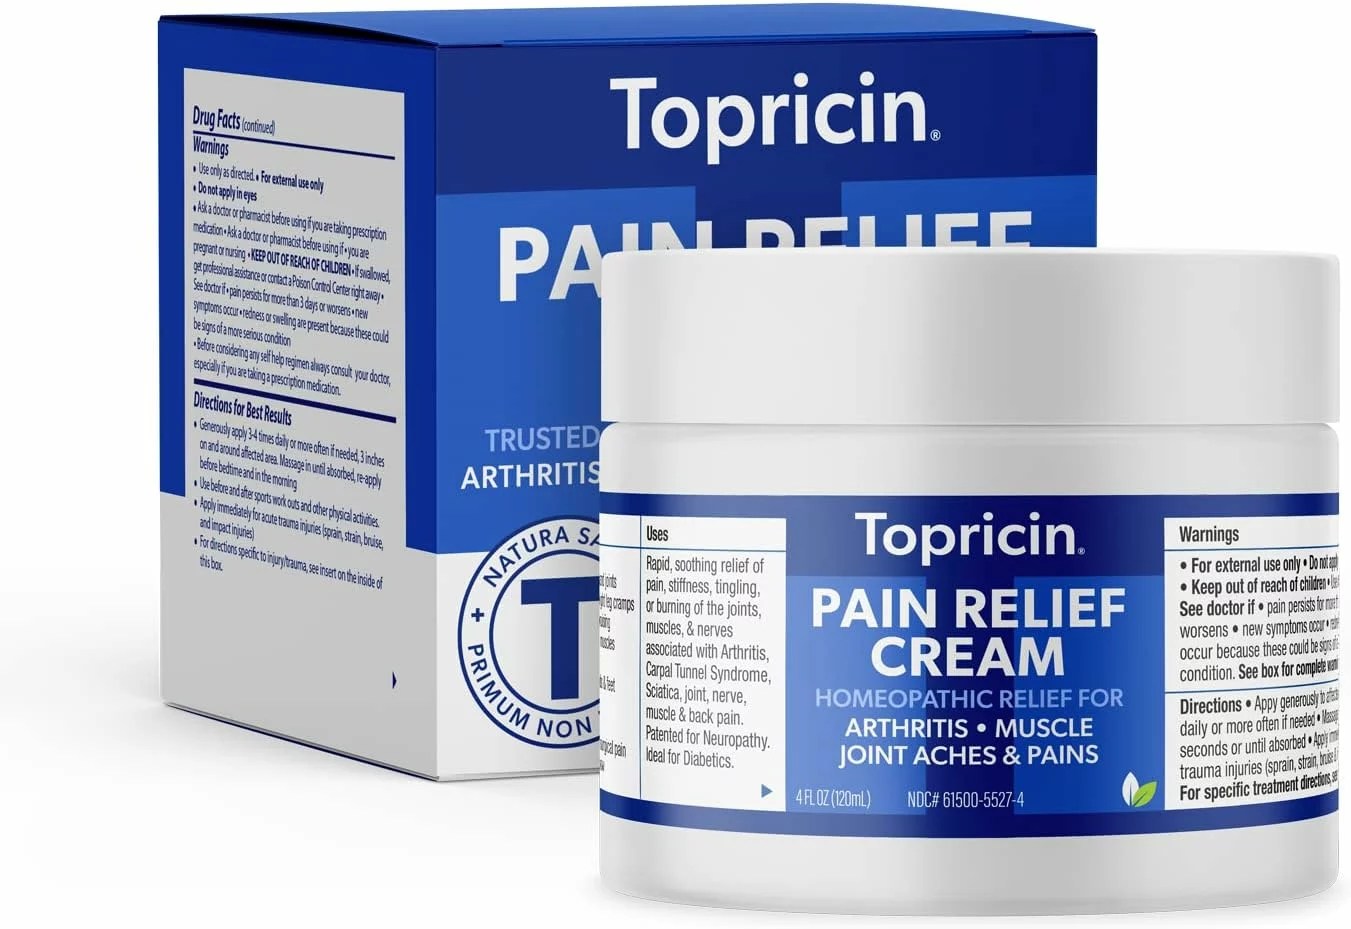 OTC Topical Products for Back Pain Relief: Cream And Gels